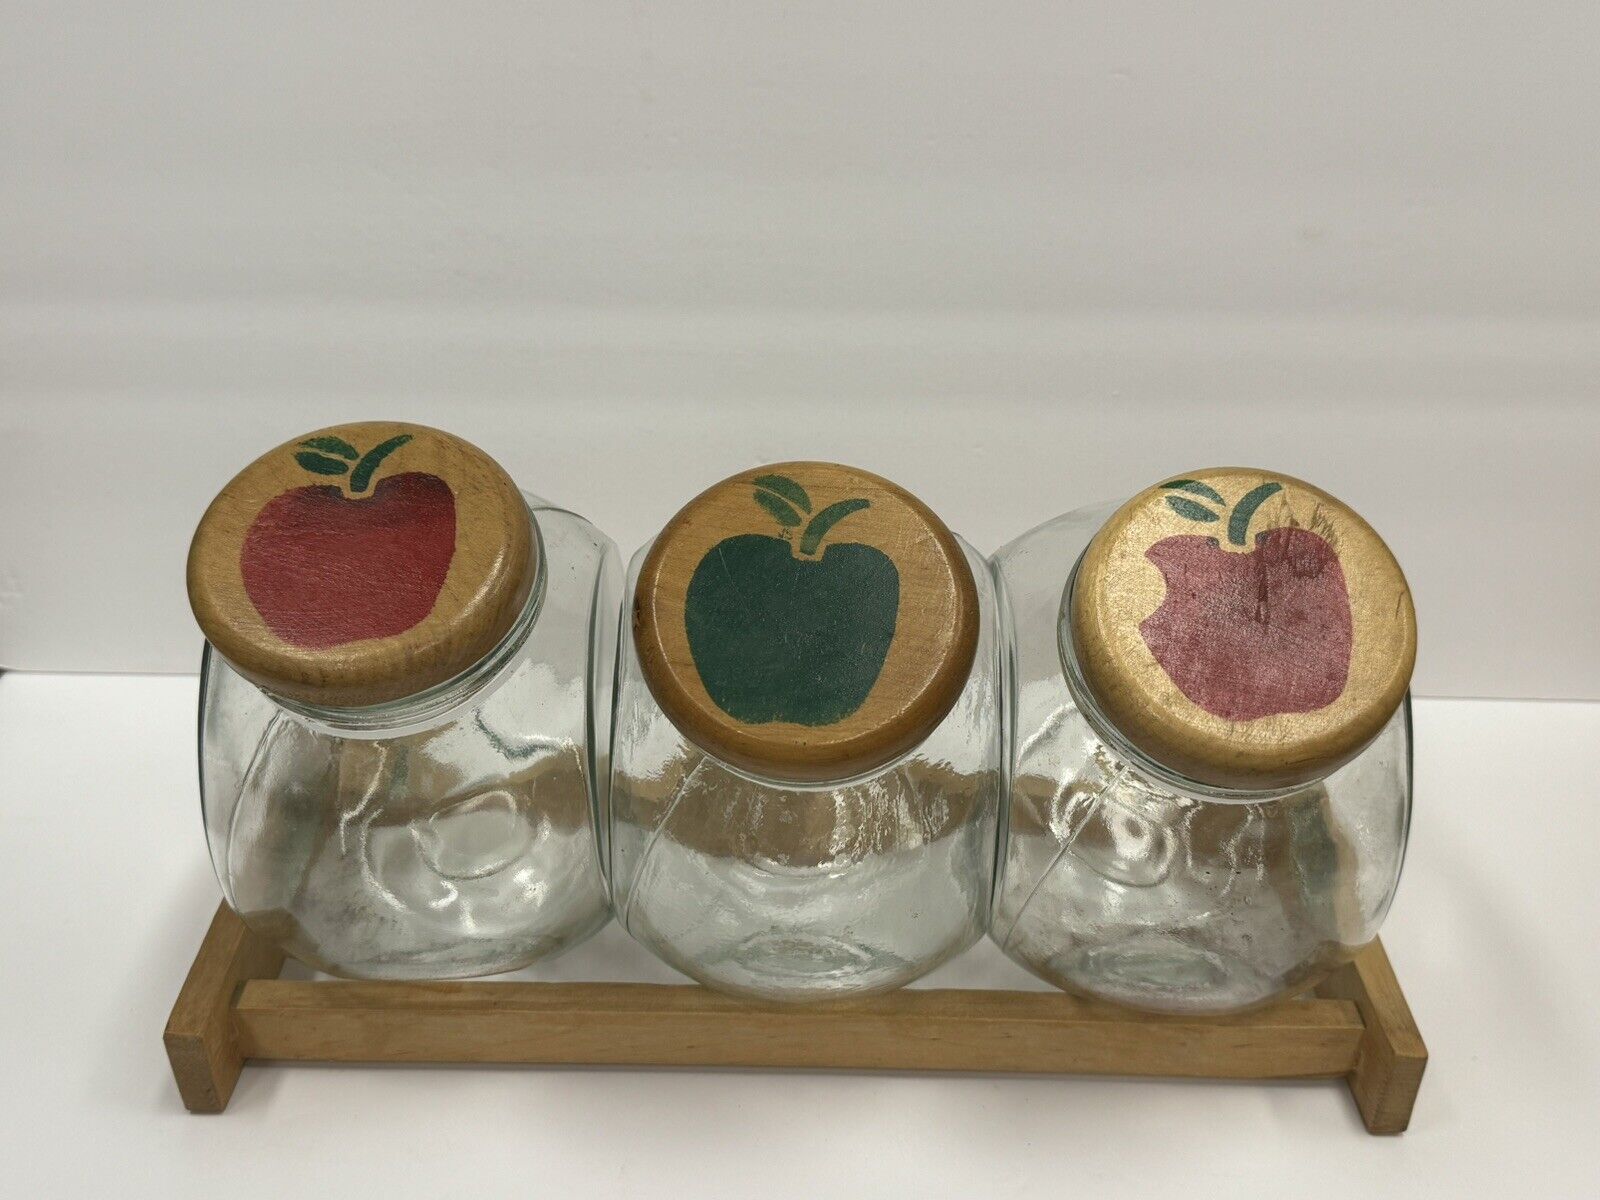 Vintage 3 Piece Glass Apple Canister Set With Stand For Kitchen And Home Decor